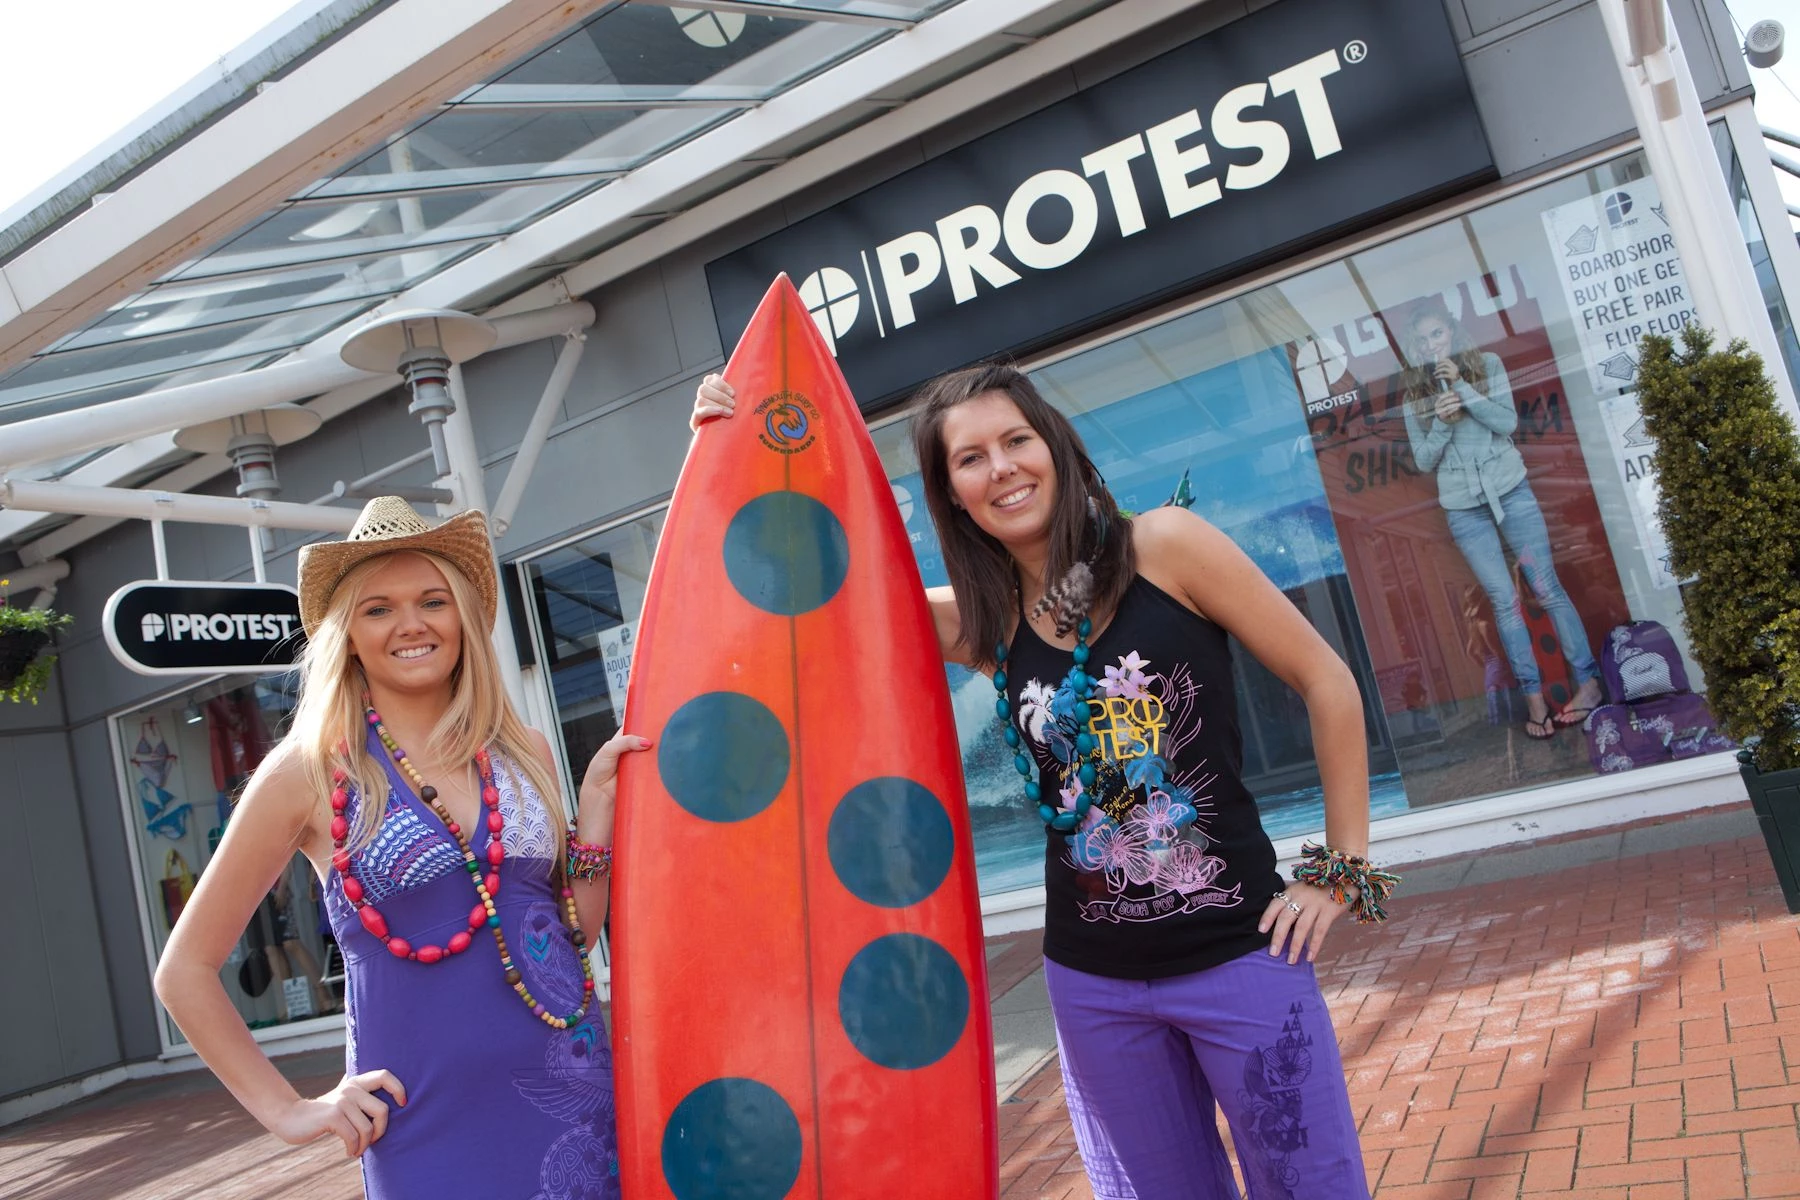 Protest delighted with first UK store